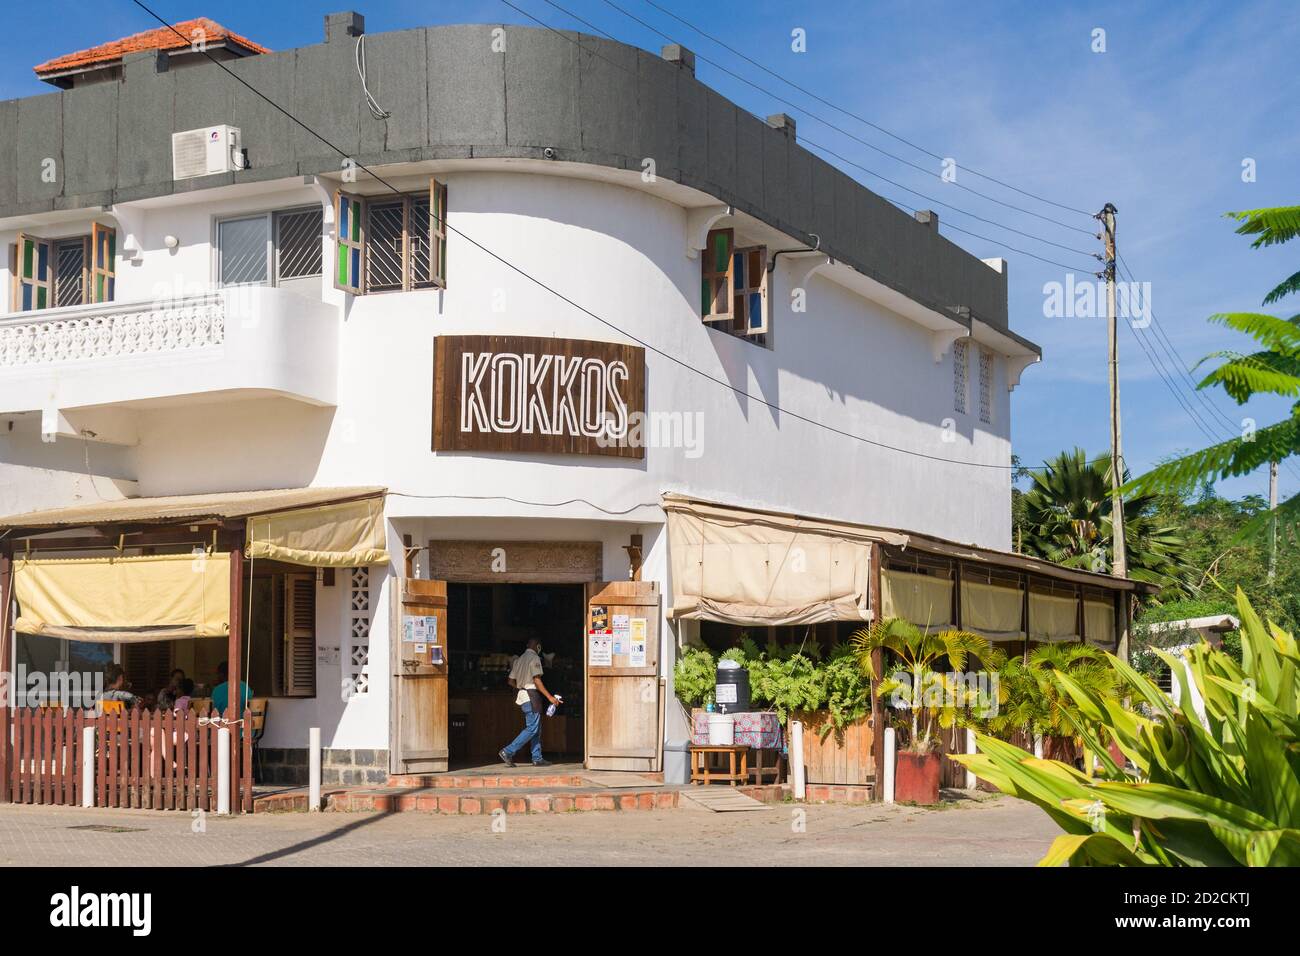 Exterior of Kokkos with people seated outside, a small local coffee shop and restaurant, Diani, Kenya Stock Photo